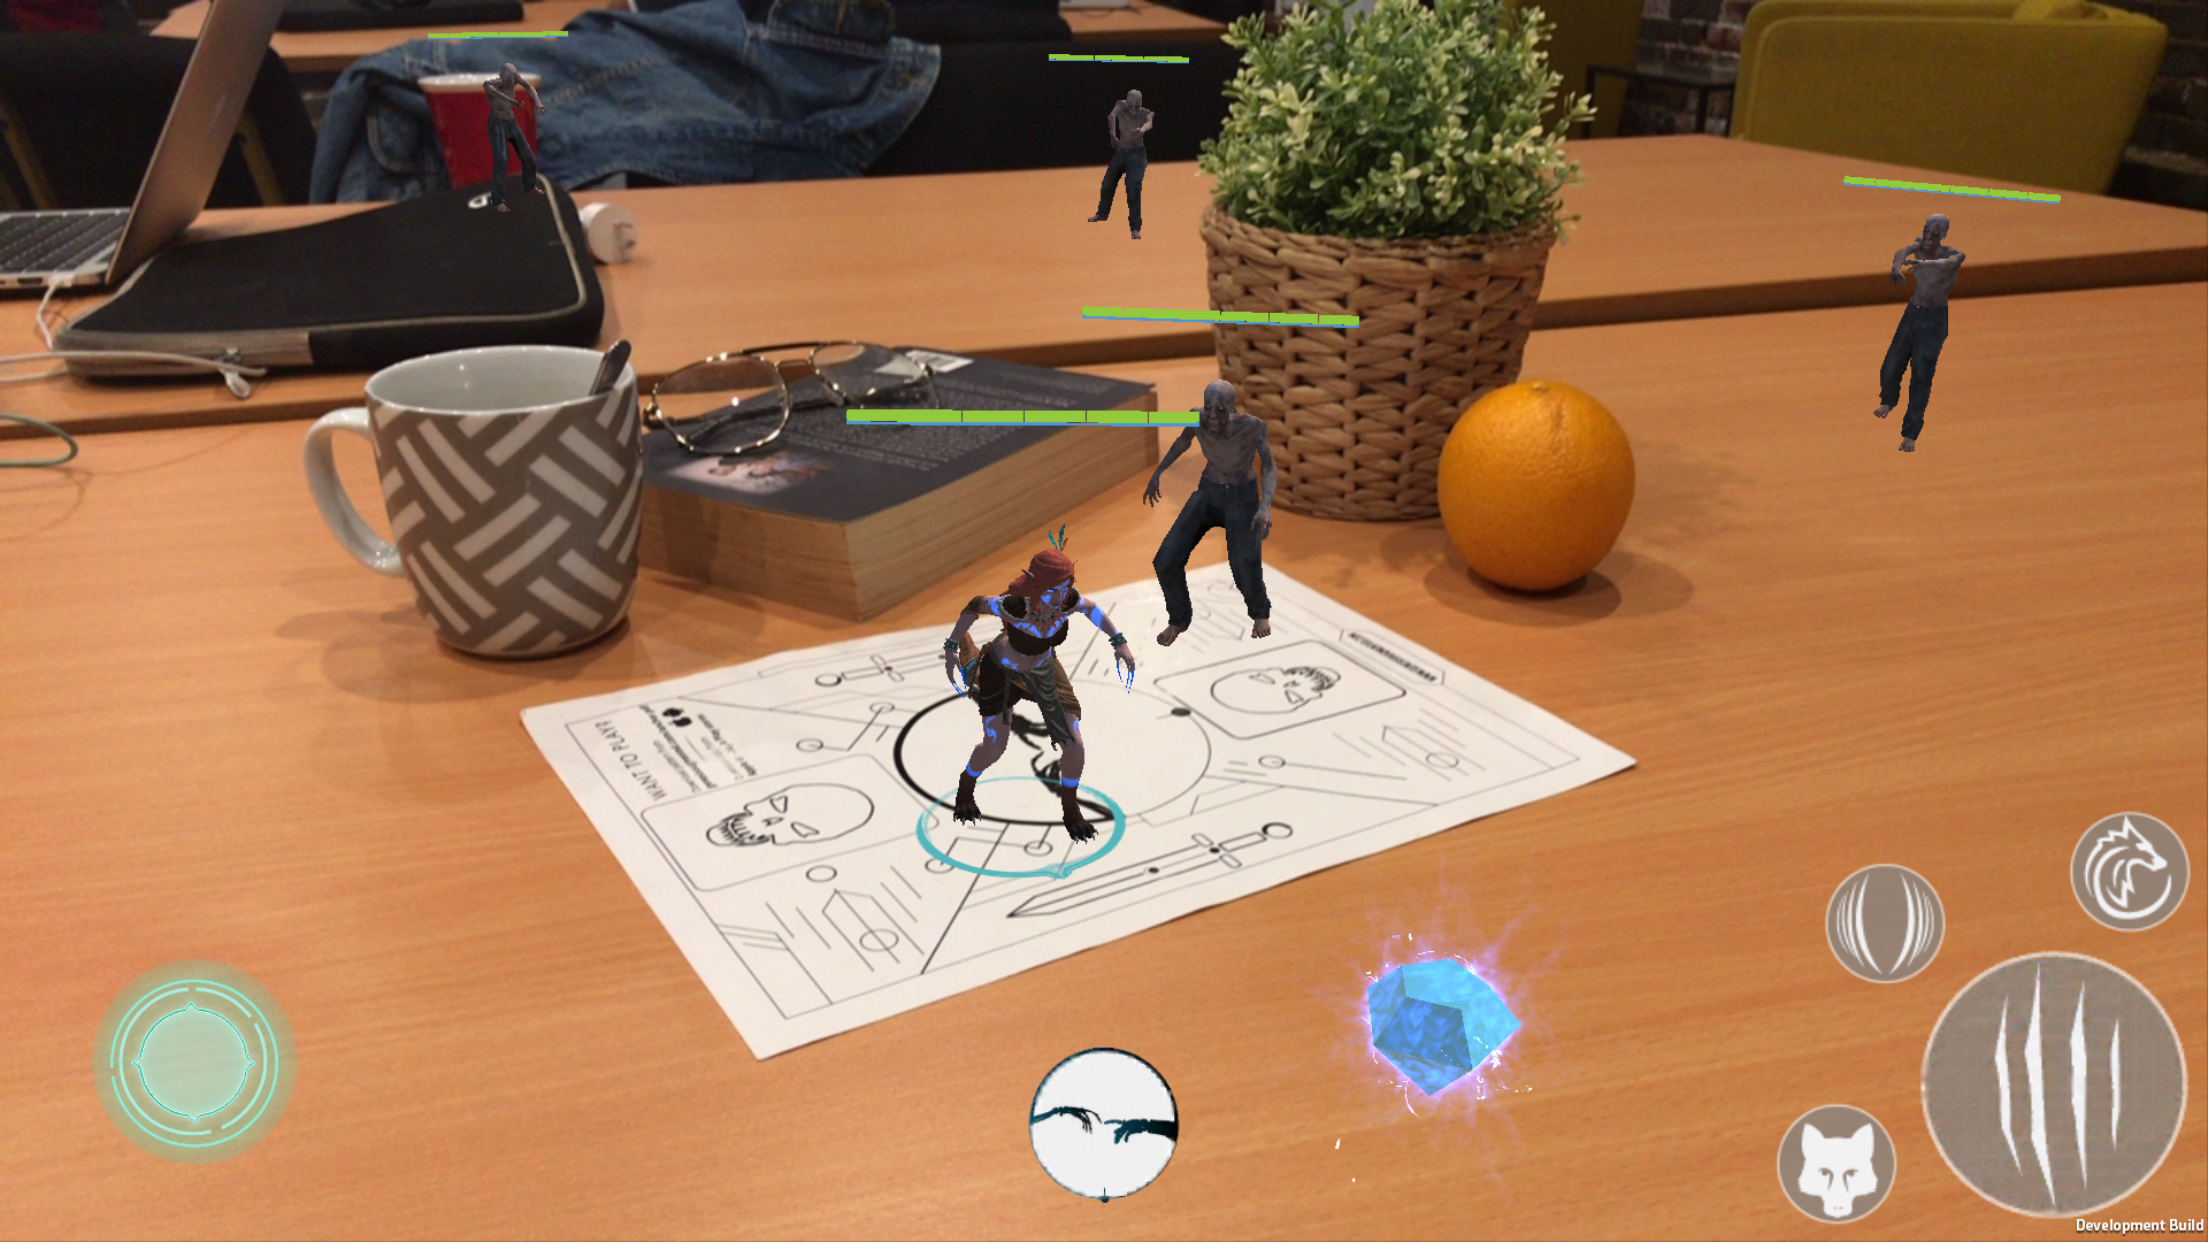 Genesis Augmented Reality playable character called Aurora in Augmented Reality on a table